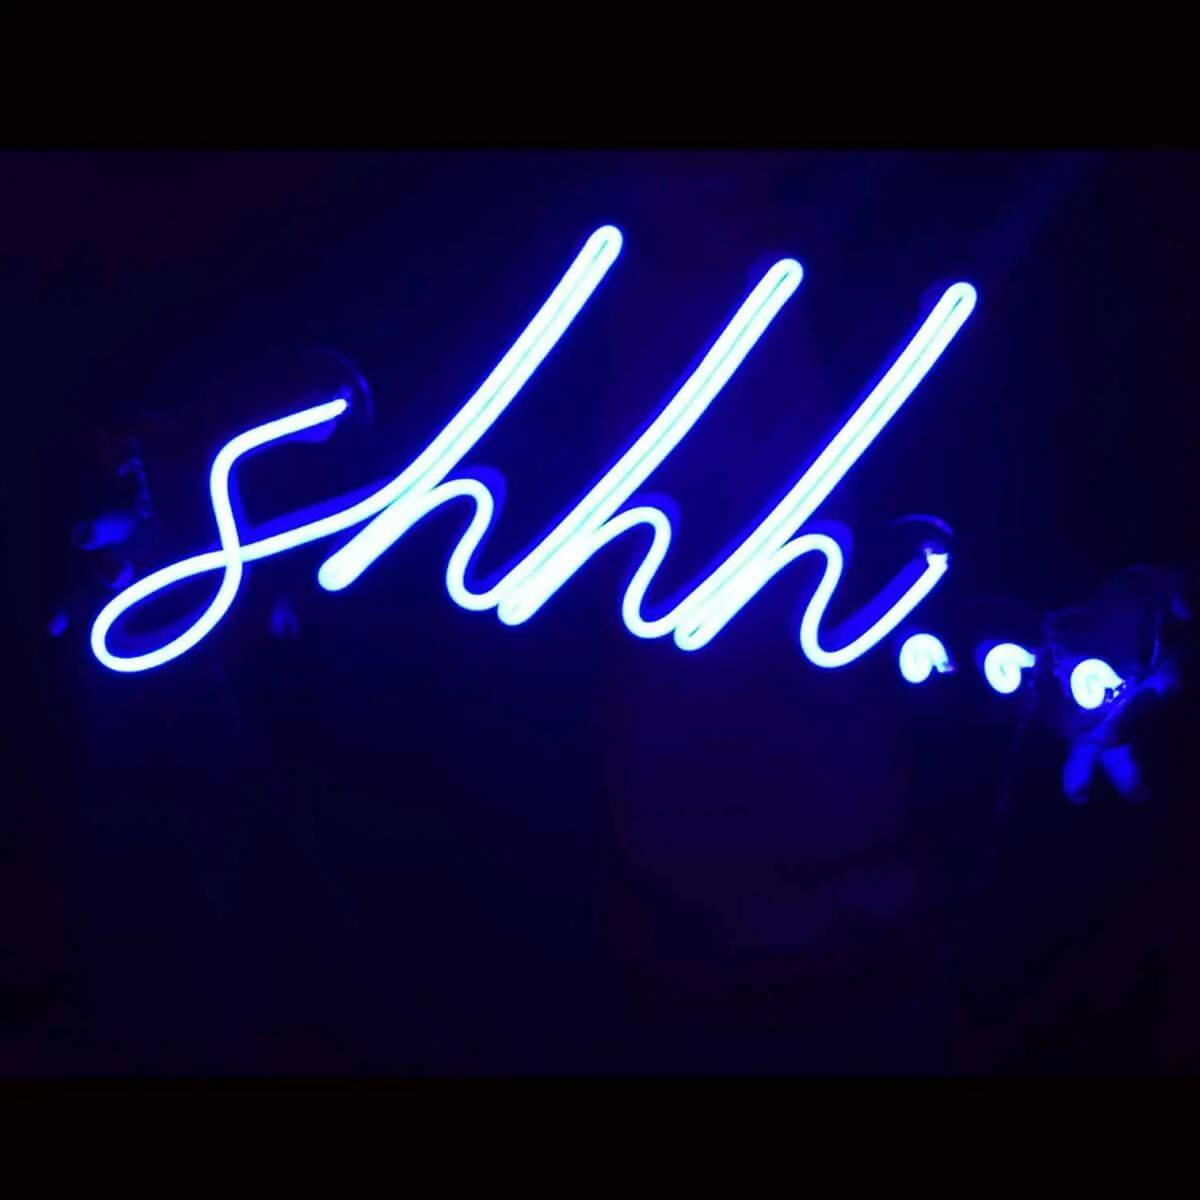 Shhh... Neon Sign Board Glow Neon Light Wall Signboards Led Sign Boards for Shop Restaurant Room Decoration - ValueBox